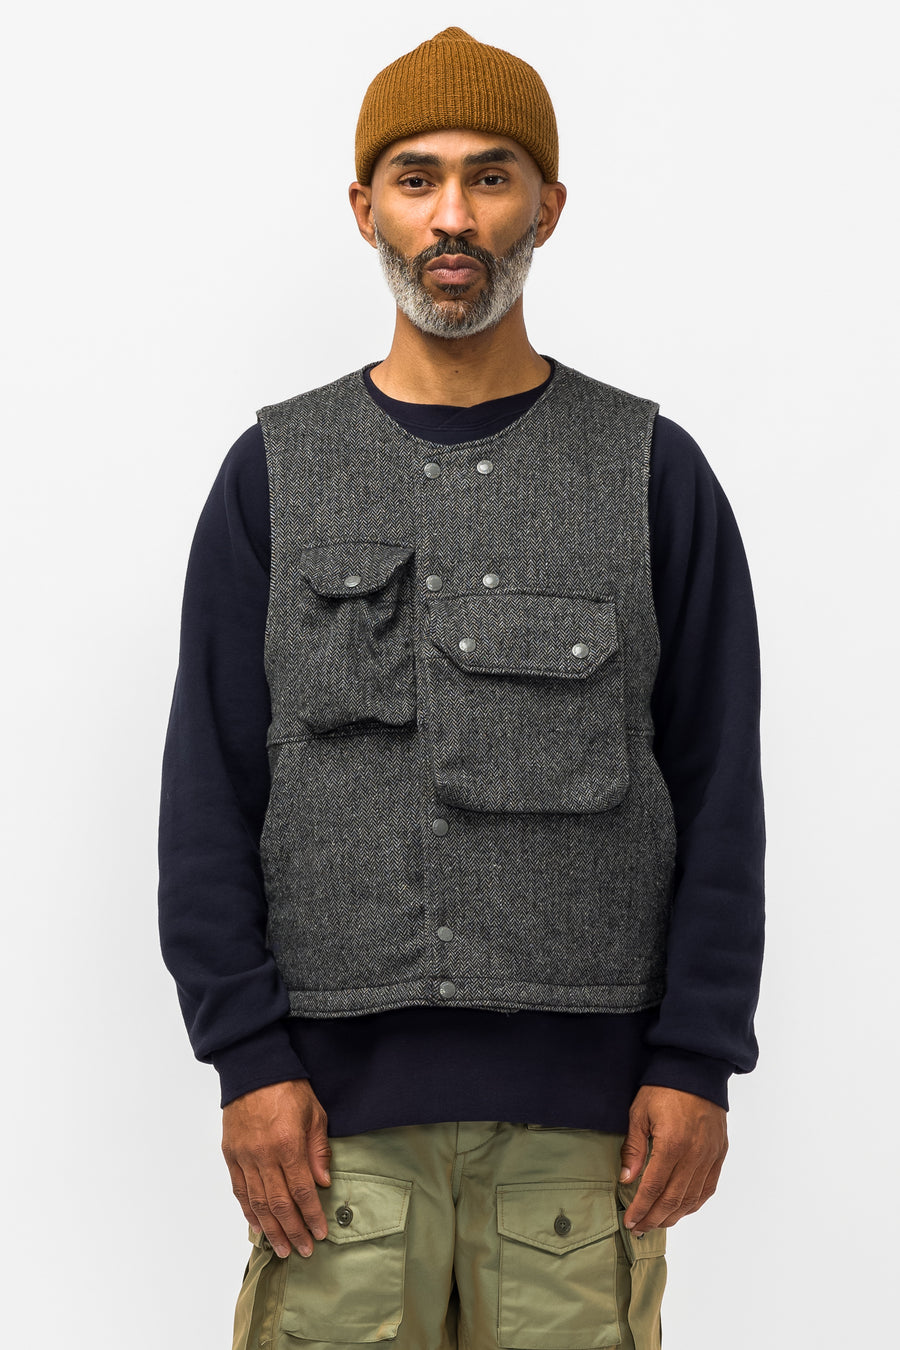 Engineered Garments 19AW cover vest